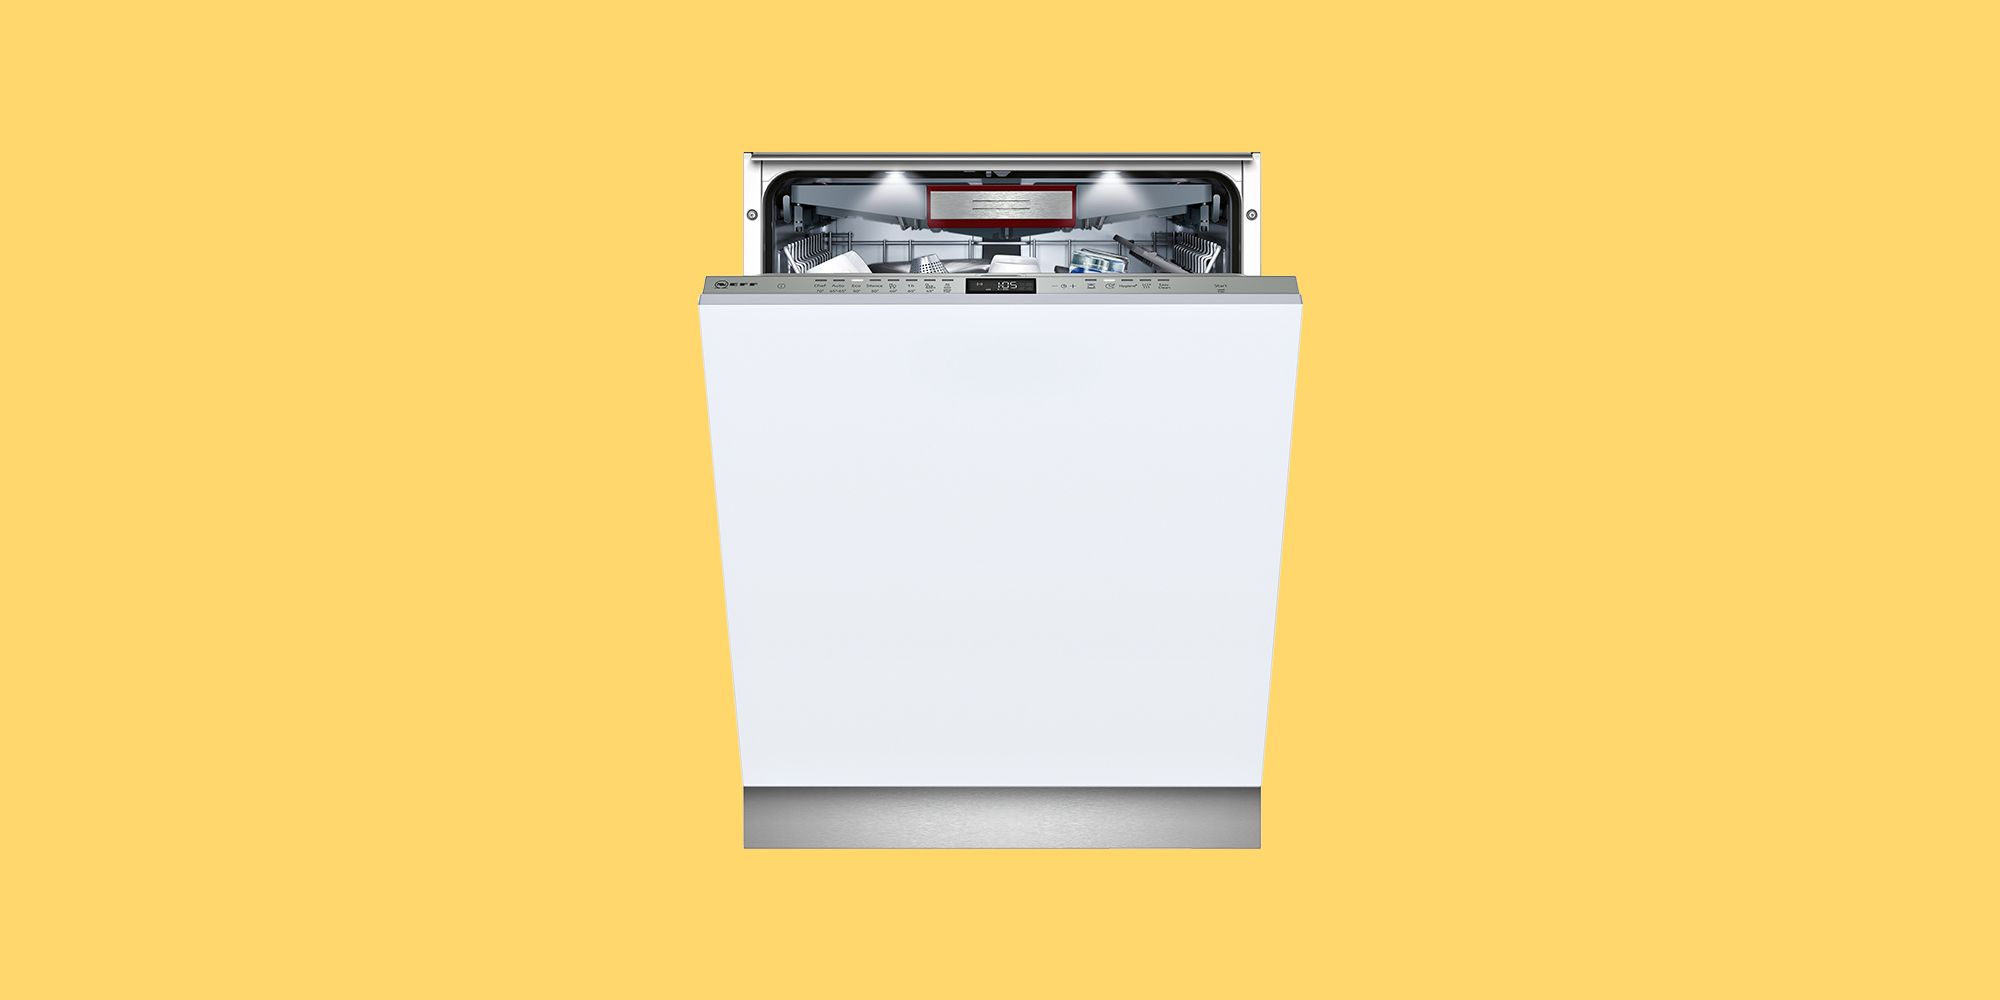 Neff S515T80D1G/51 Dishwasher Review